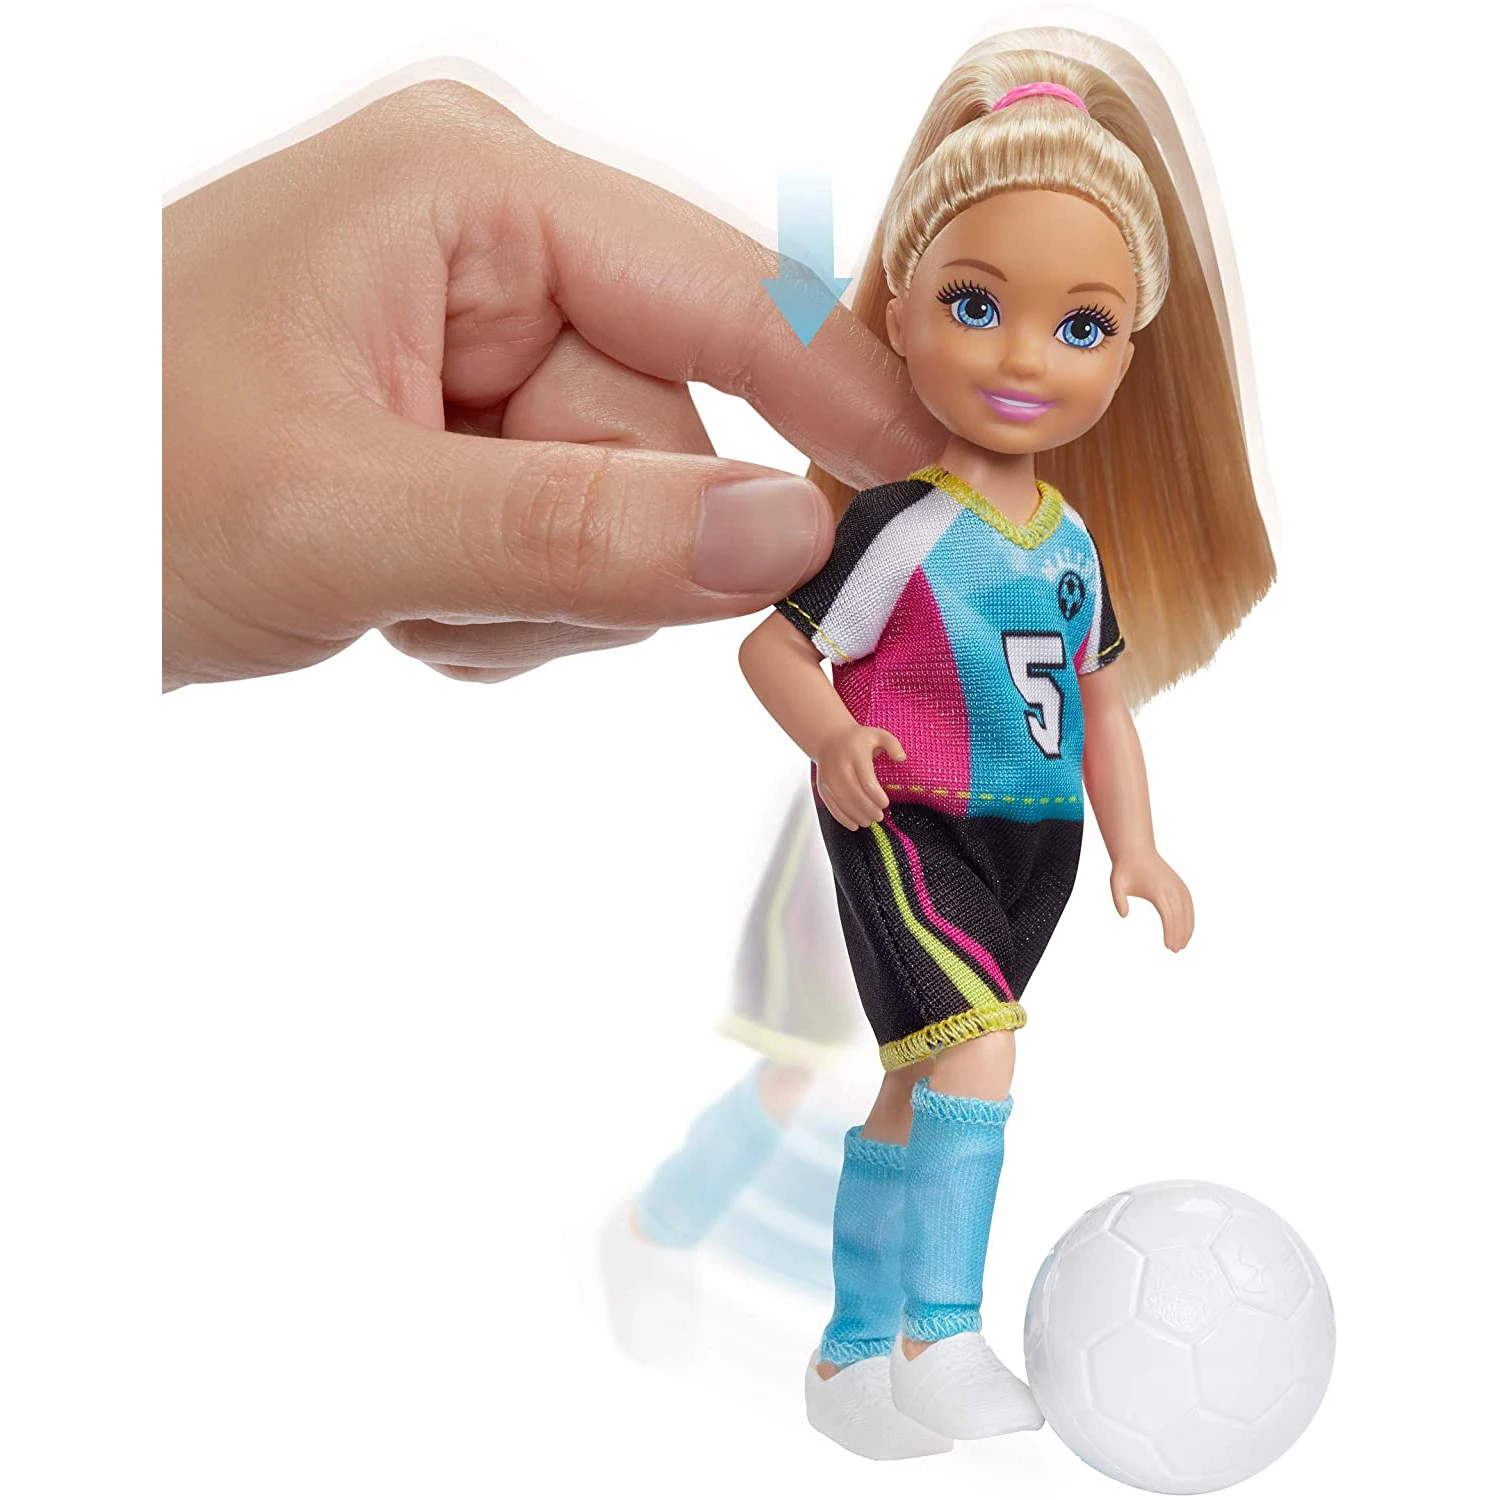 

Barbie Dreamhouse Adventures 6-inch Chelsea Doll with Soccer Playset and Accessories Children Toy Birthday Gift